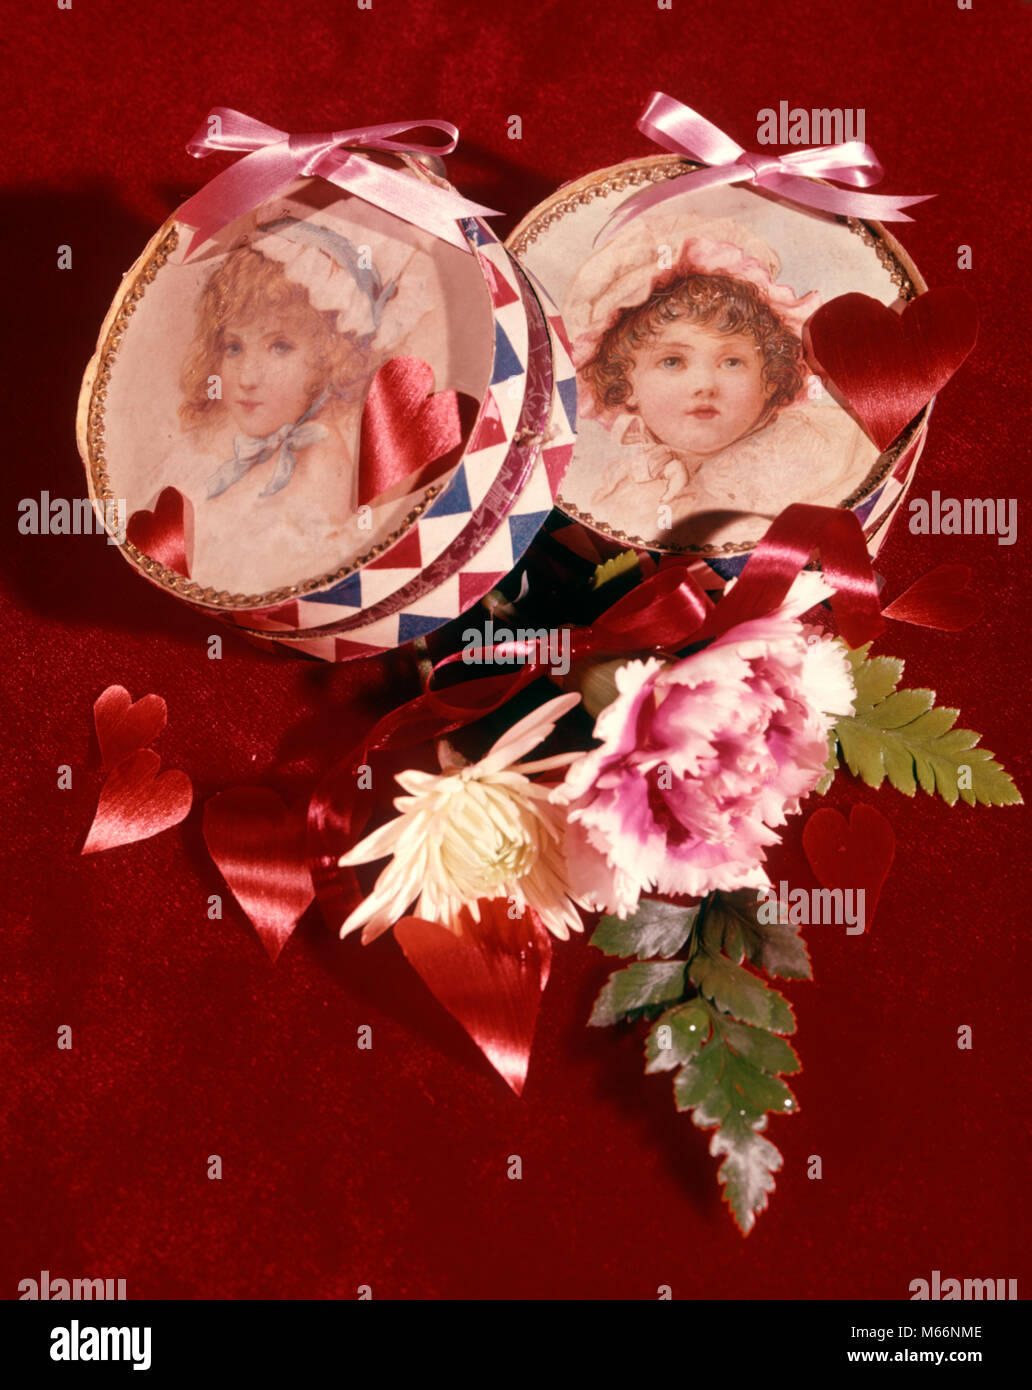 VALENTINES DAY BOXES PRESENTS PORTRAITS LITTLE GIRLS FLOWERS HEARTS RED - kv224 HAR001 HARS CAUCASIAN ETHNICITY FEAST DAY FEBRUARY 14 OLD FASHIONED PERSONS SAINT VALENTINE ST. VALENTINE ST. VALENTINE'S DAY VALENTINE'S DAY Stock Photo